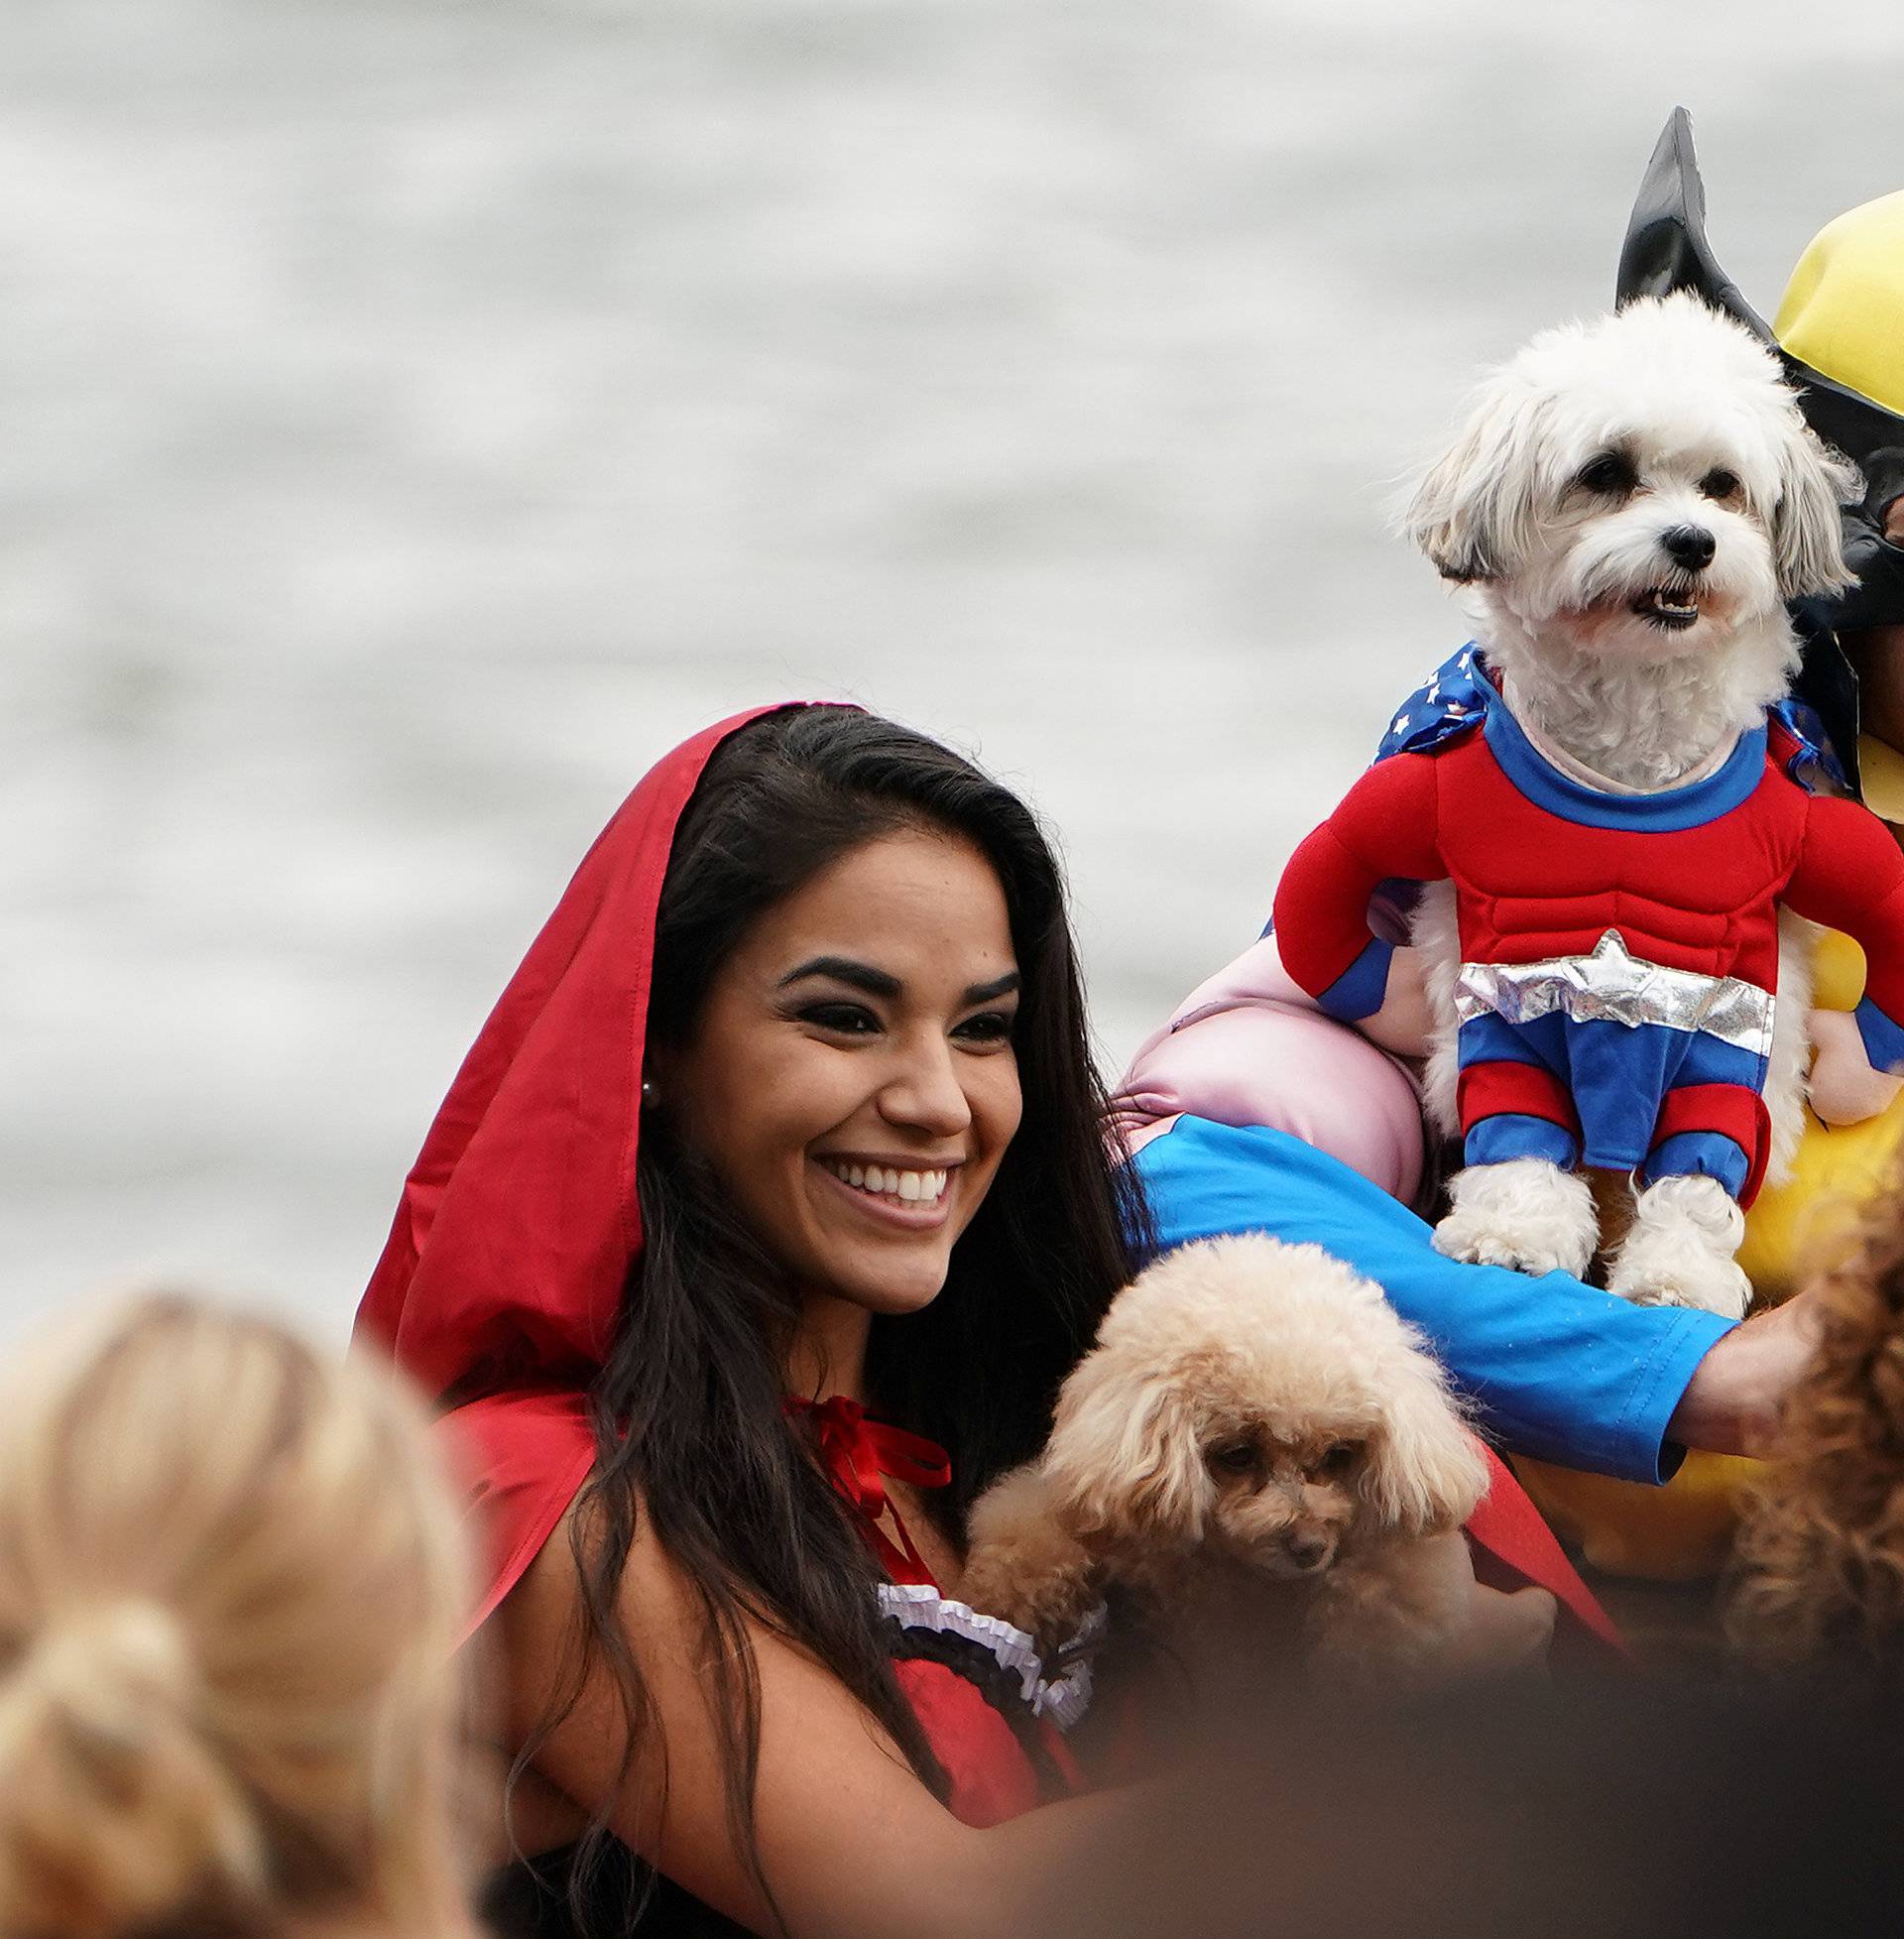 People attend the Tompkins Square Park Halloween Dog Parade at East River Park in the Manhattan borough of New York City